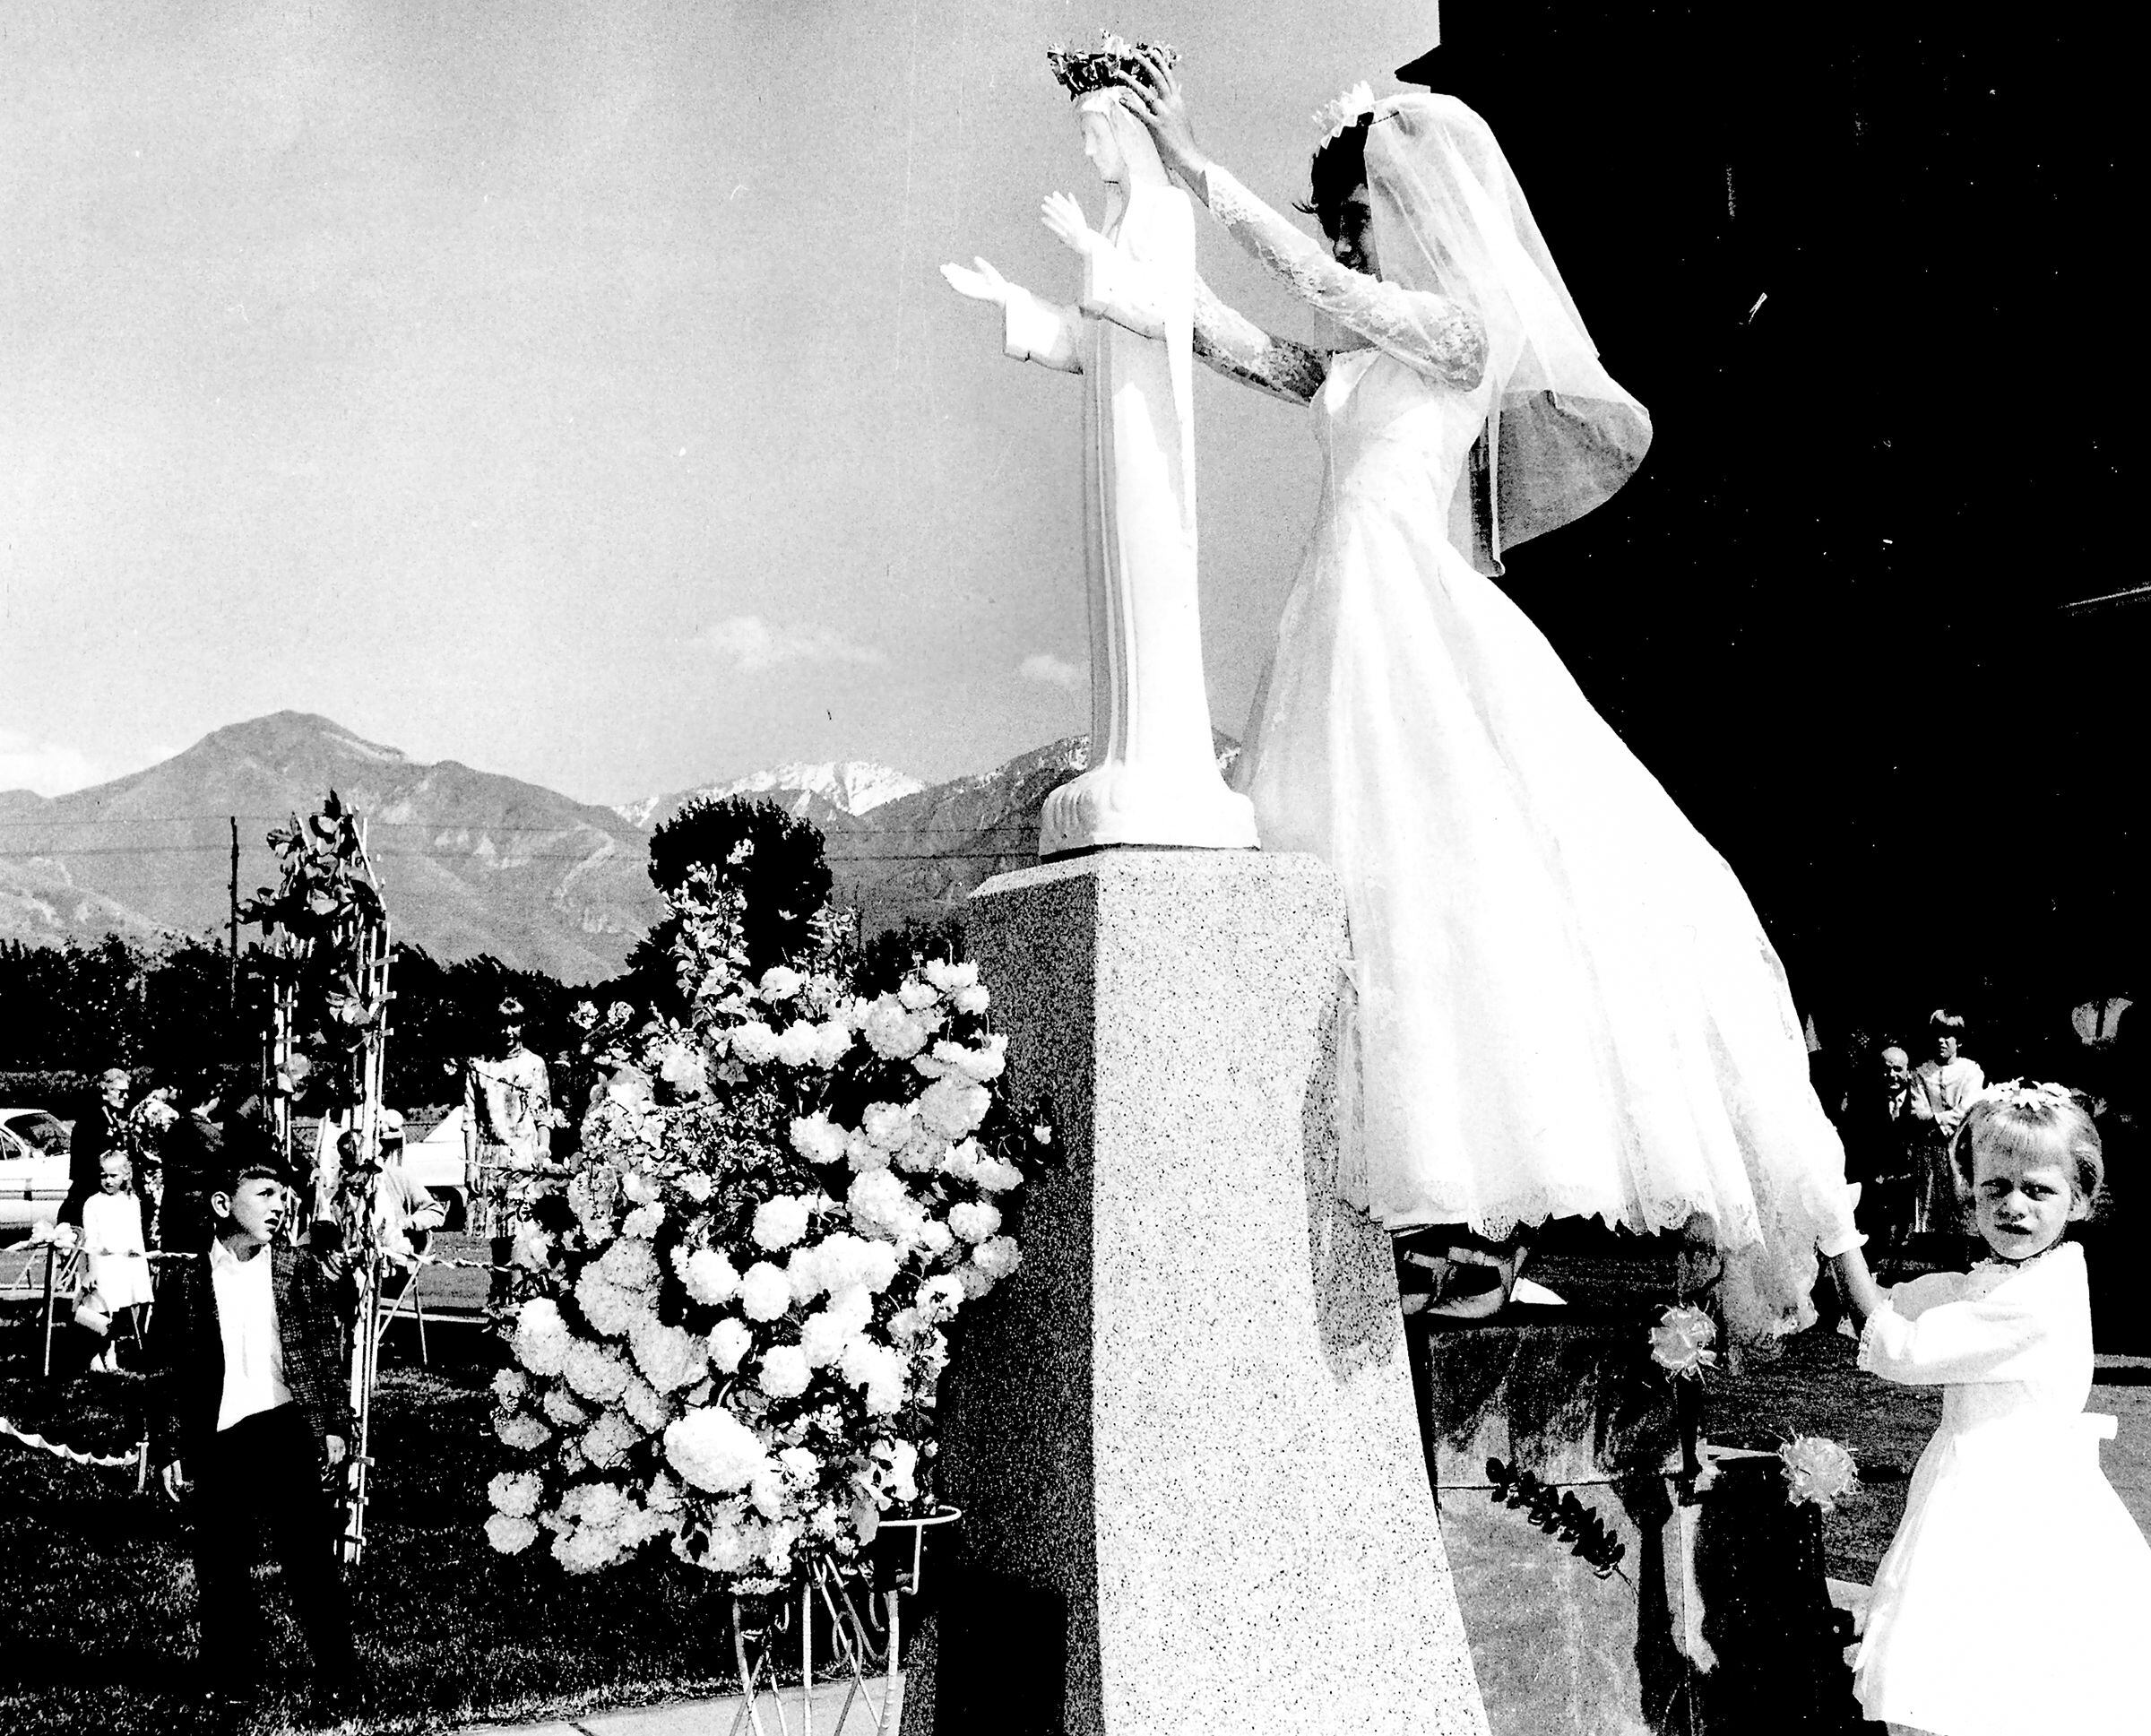 (Roman Catholic Diocese of Salt Lake City archives) At a 1966 spring celebration to honor the Virgin Mary, a student from St. Ann Parish wears an elaborate wedding dress — evoking both her First Communion and her future marriage.